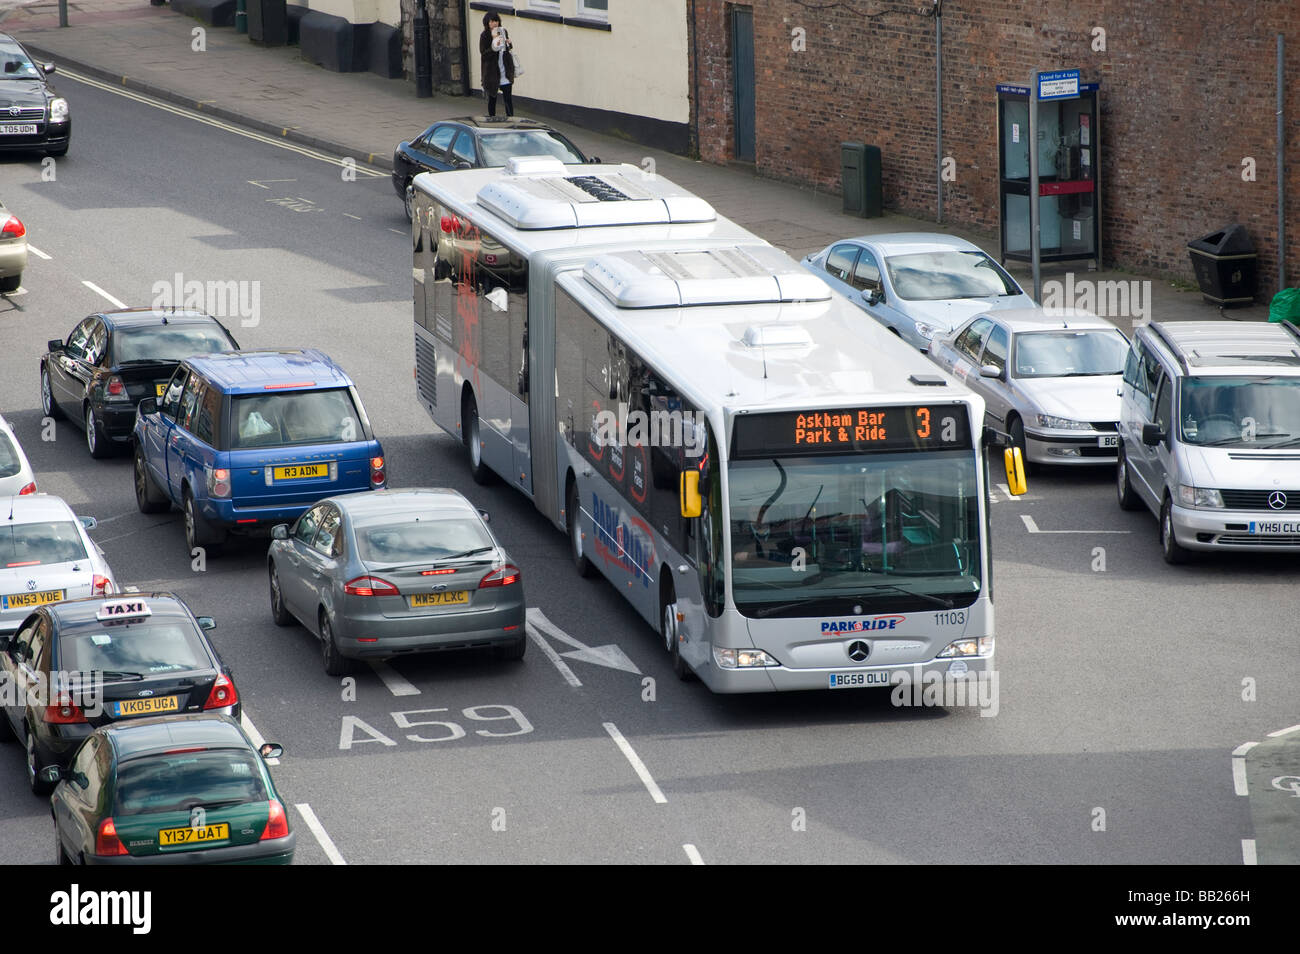 Silver bendy bus on a park and ride service in York city centre England ...